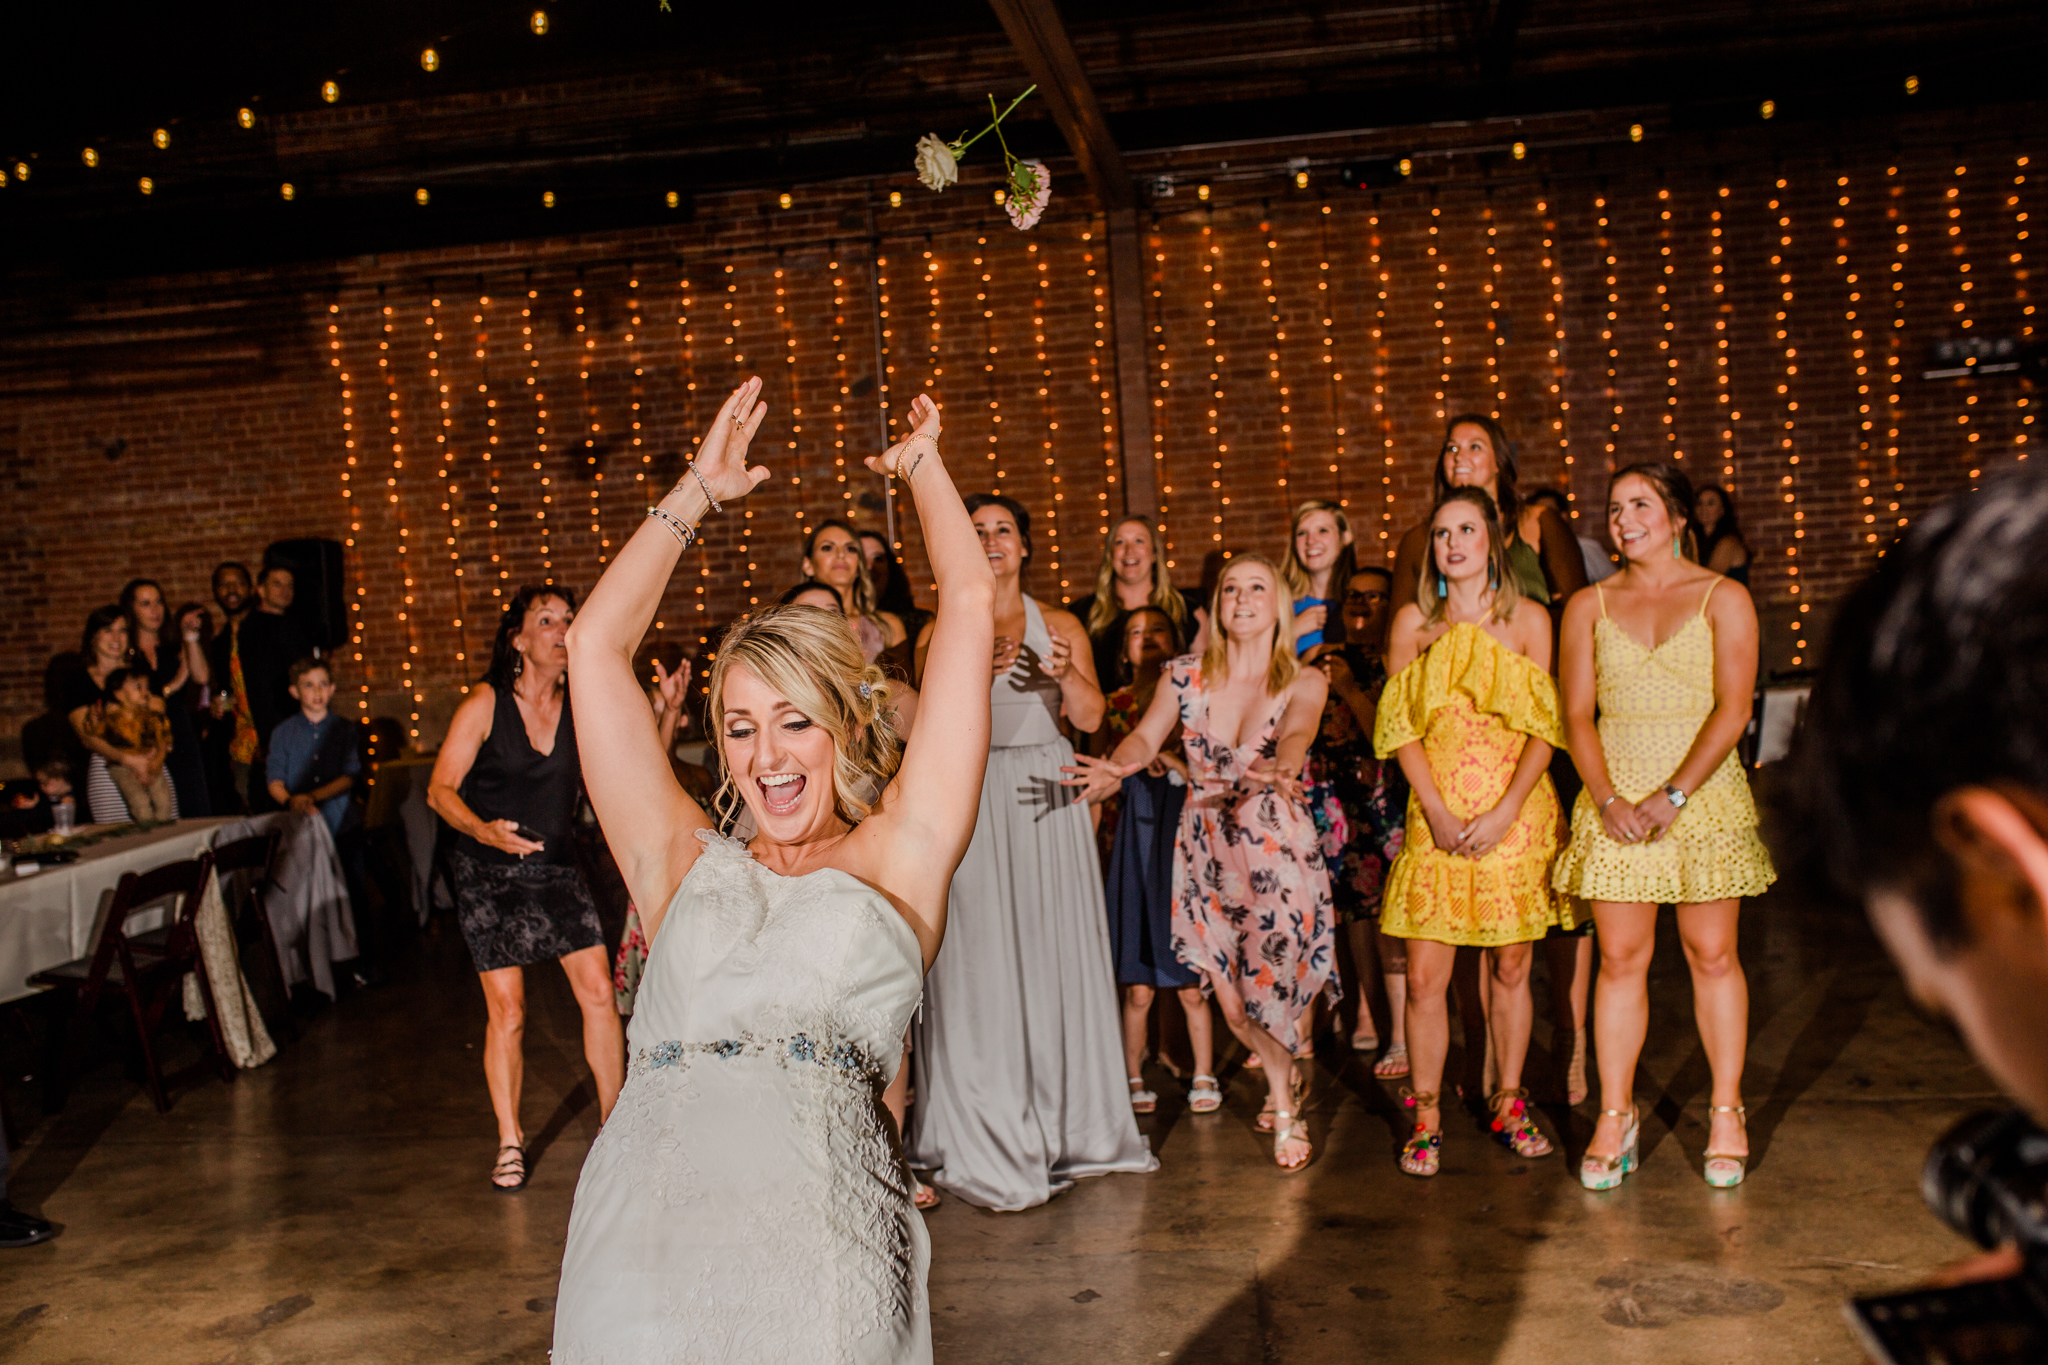  Tips To Keep People From Leaving Your Wedding Reception Early, Wichita Wedding Photographer, Wichita Ks Wedding Photographer, Kansas Wedding Photographer, Midwest Wedding Photographer, Wedding Planning Tips 